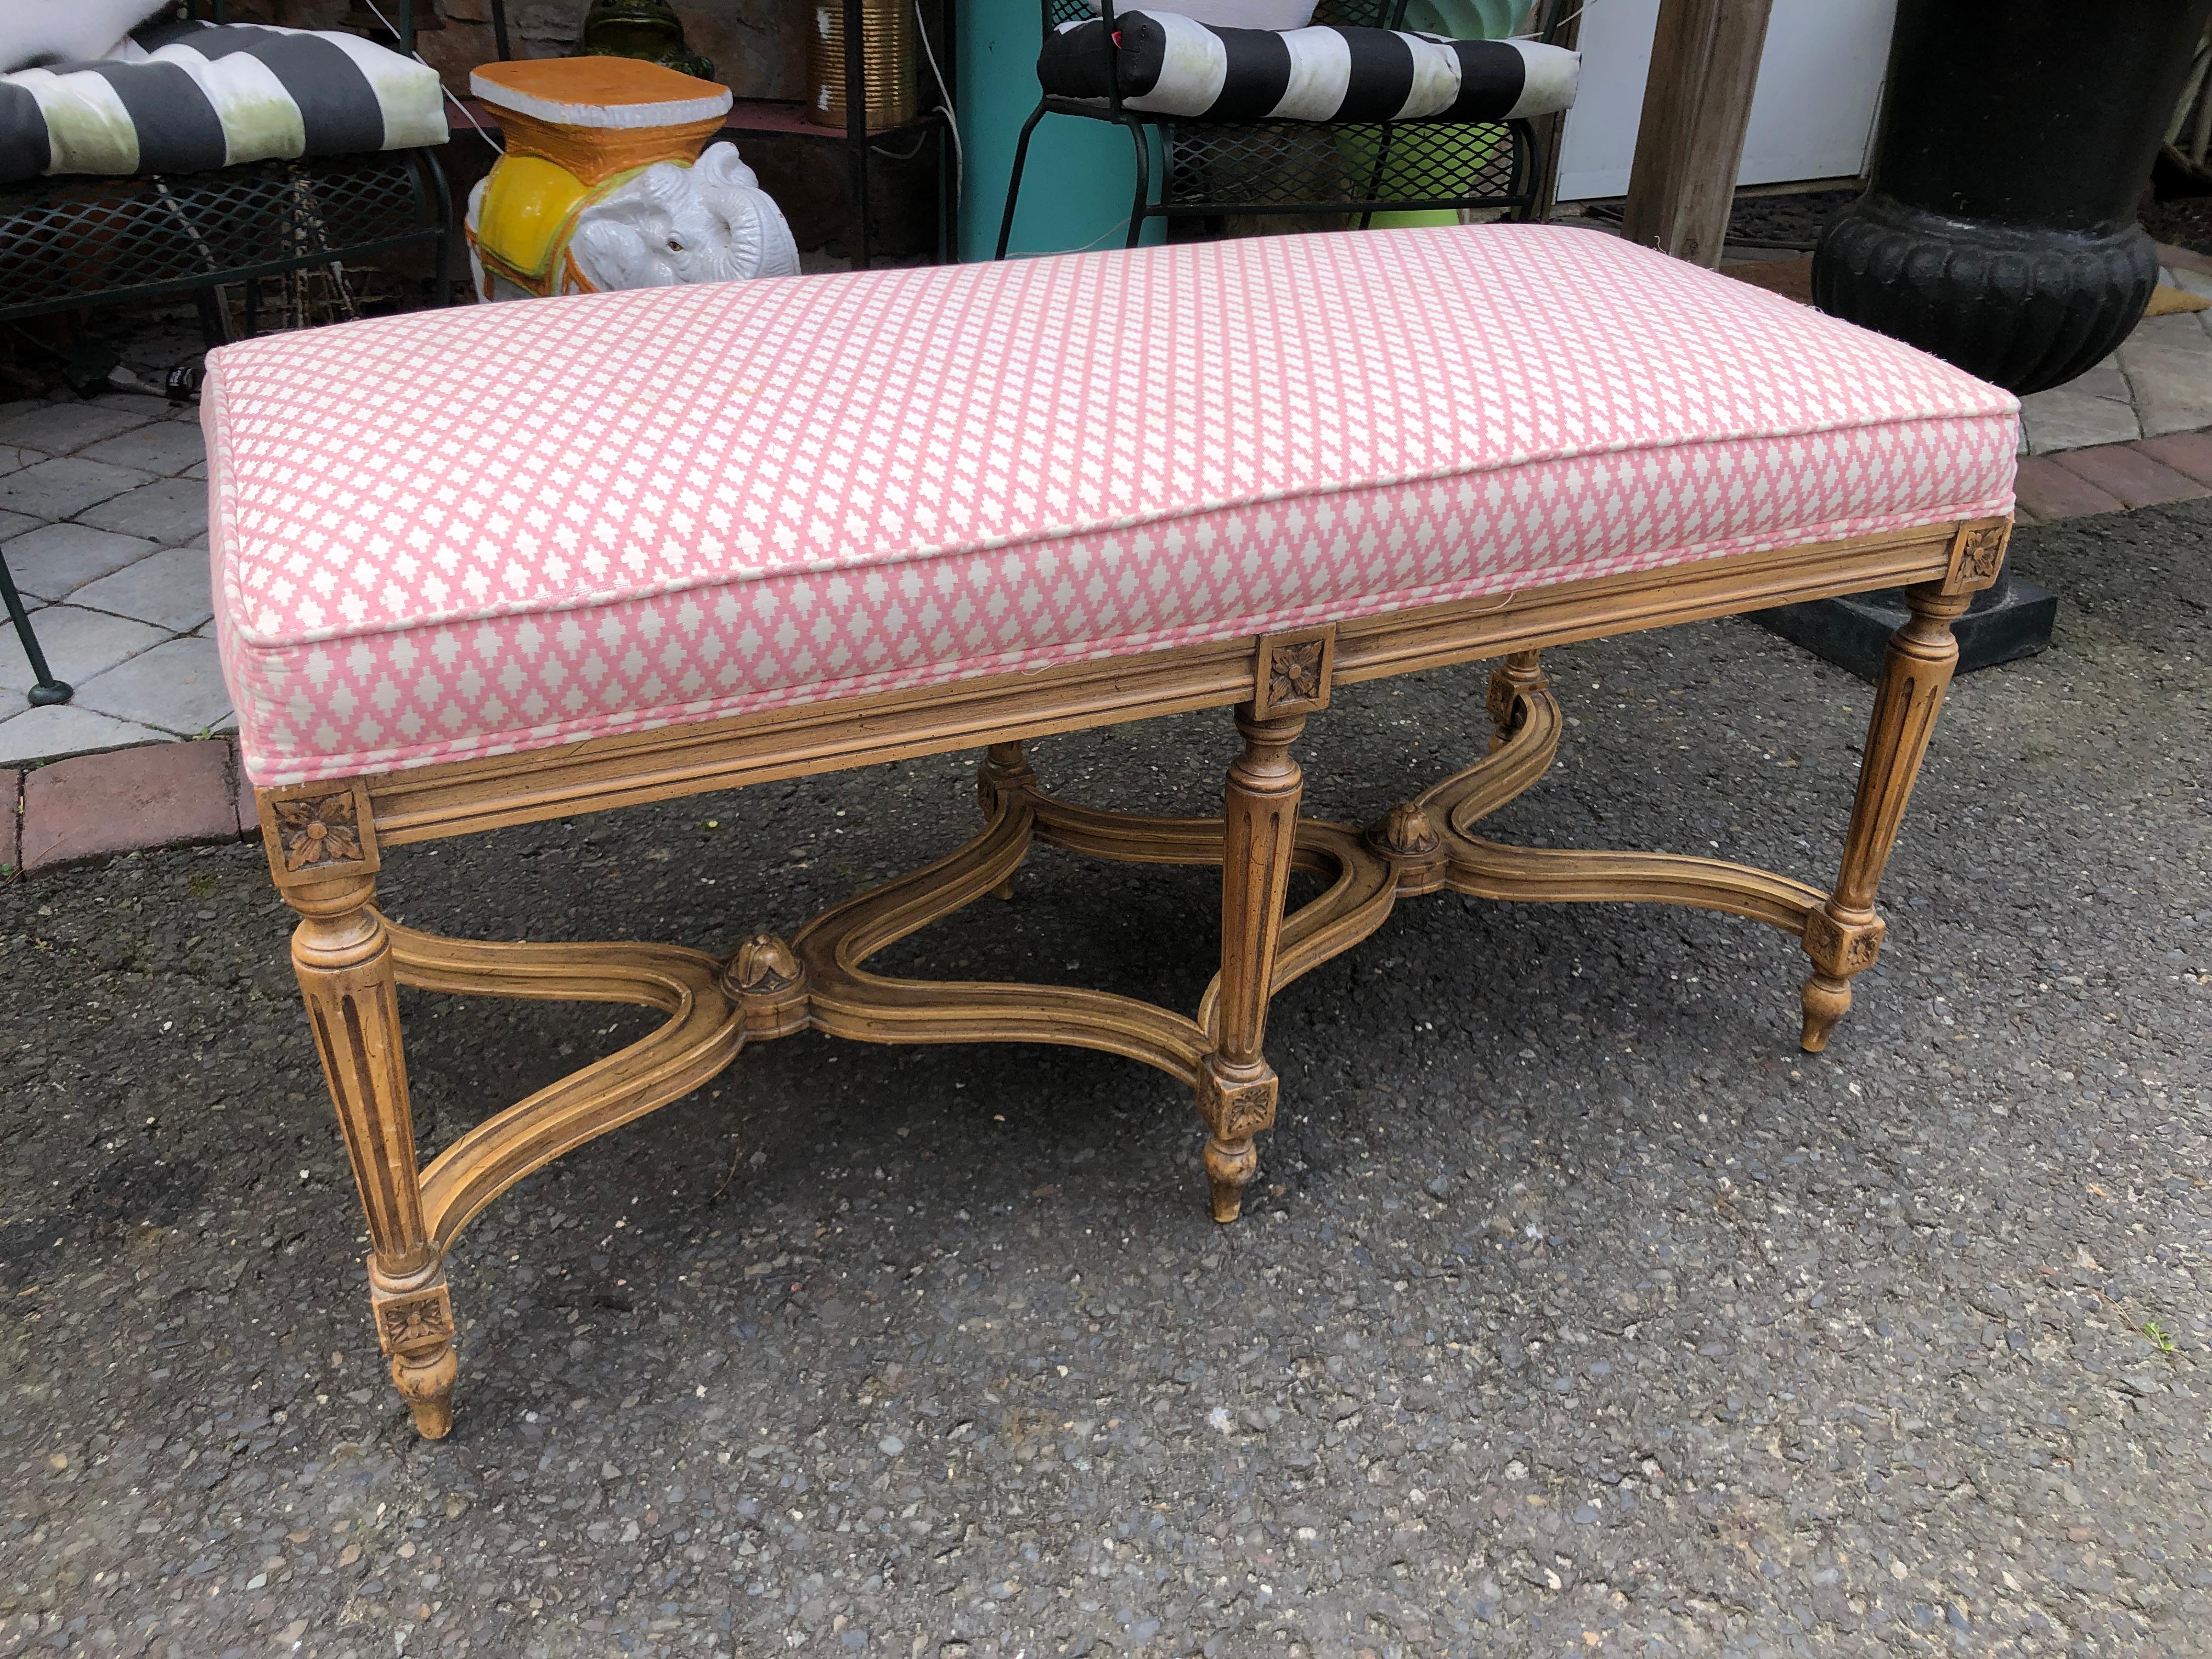 Lovely Hollywood Regency Dorothy Draper style carved wood bench.  Well crafted carved fruitwood base with custom upholstered top, this piece measures 19